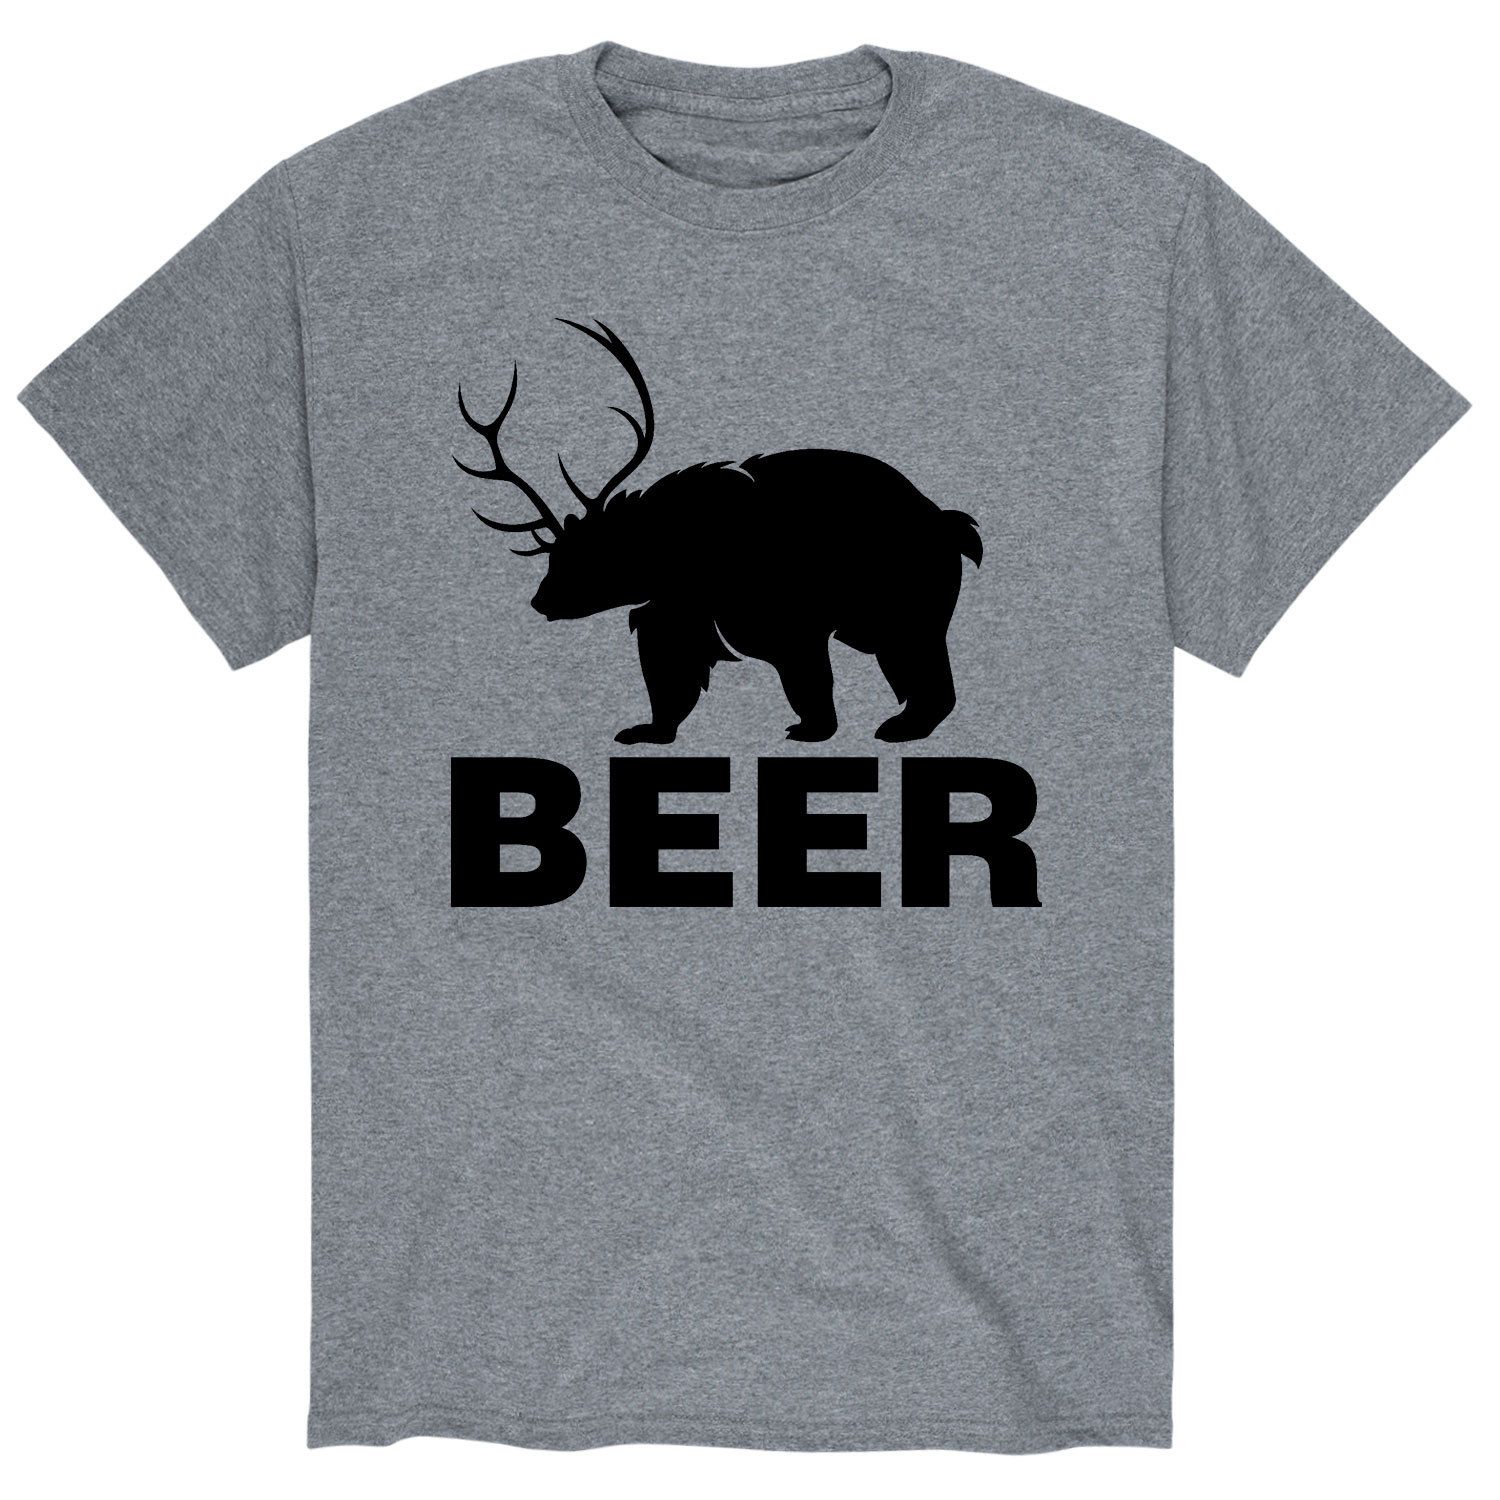 Image for Licensed Character Men's Hunting Beer Bear Tee at Kohl's.